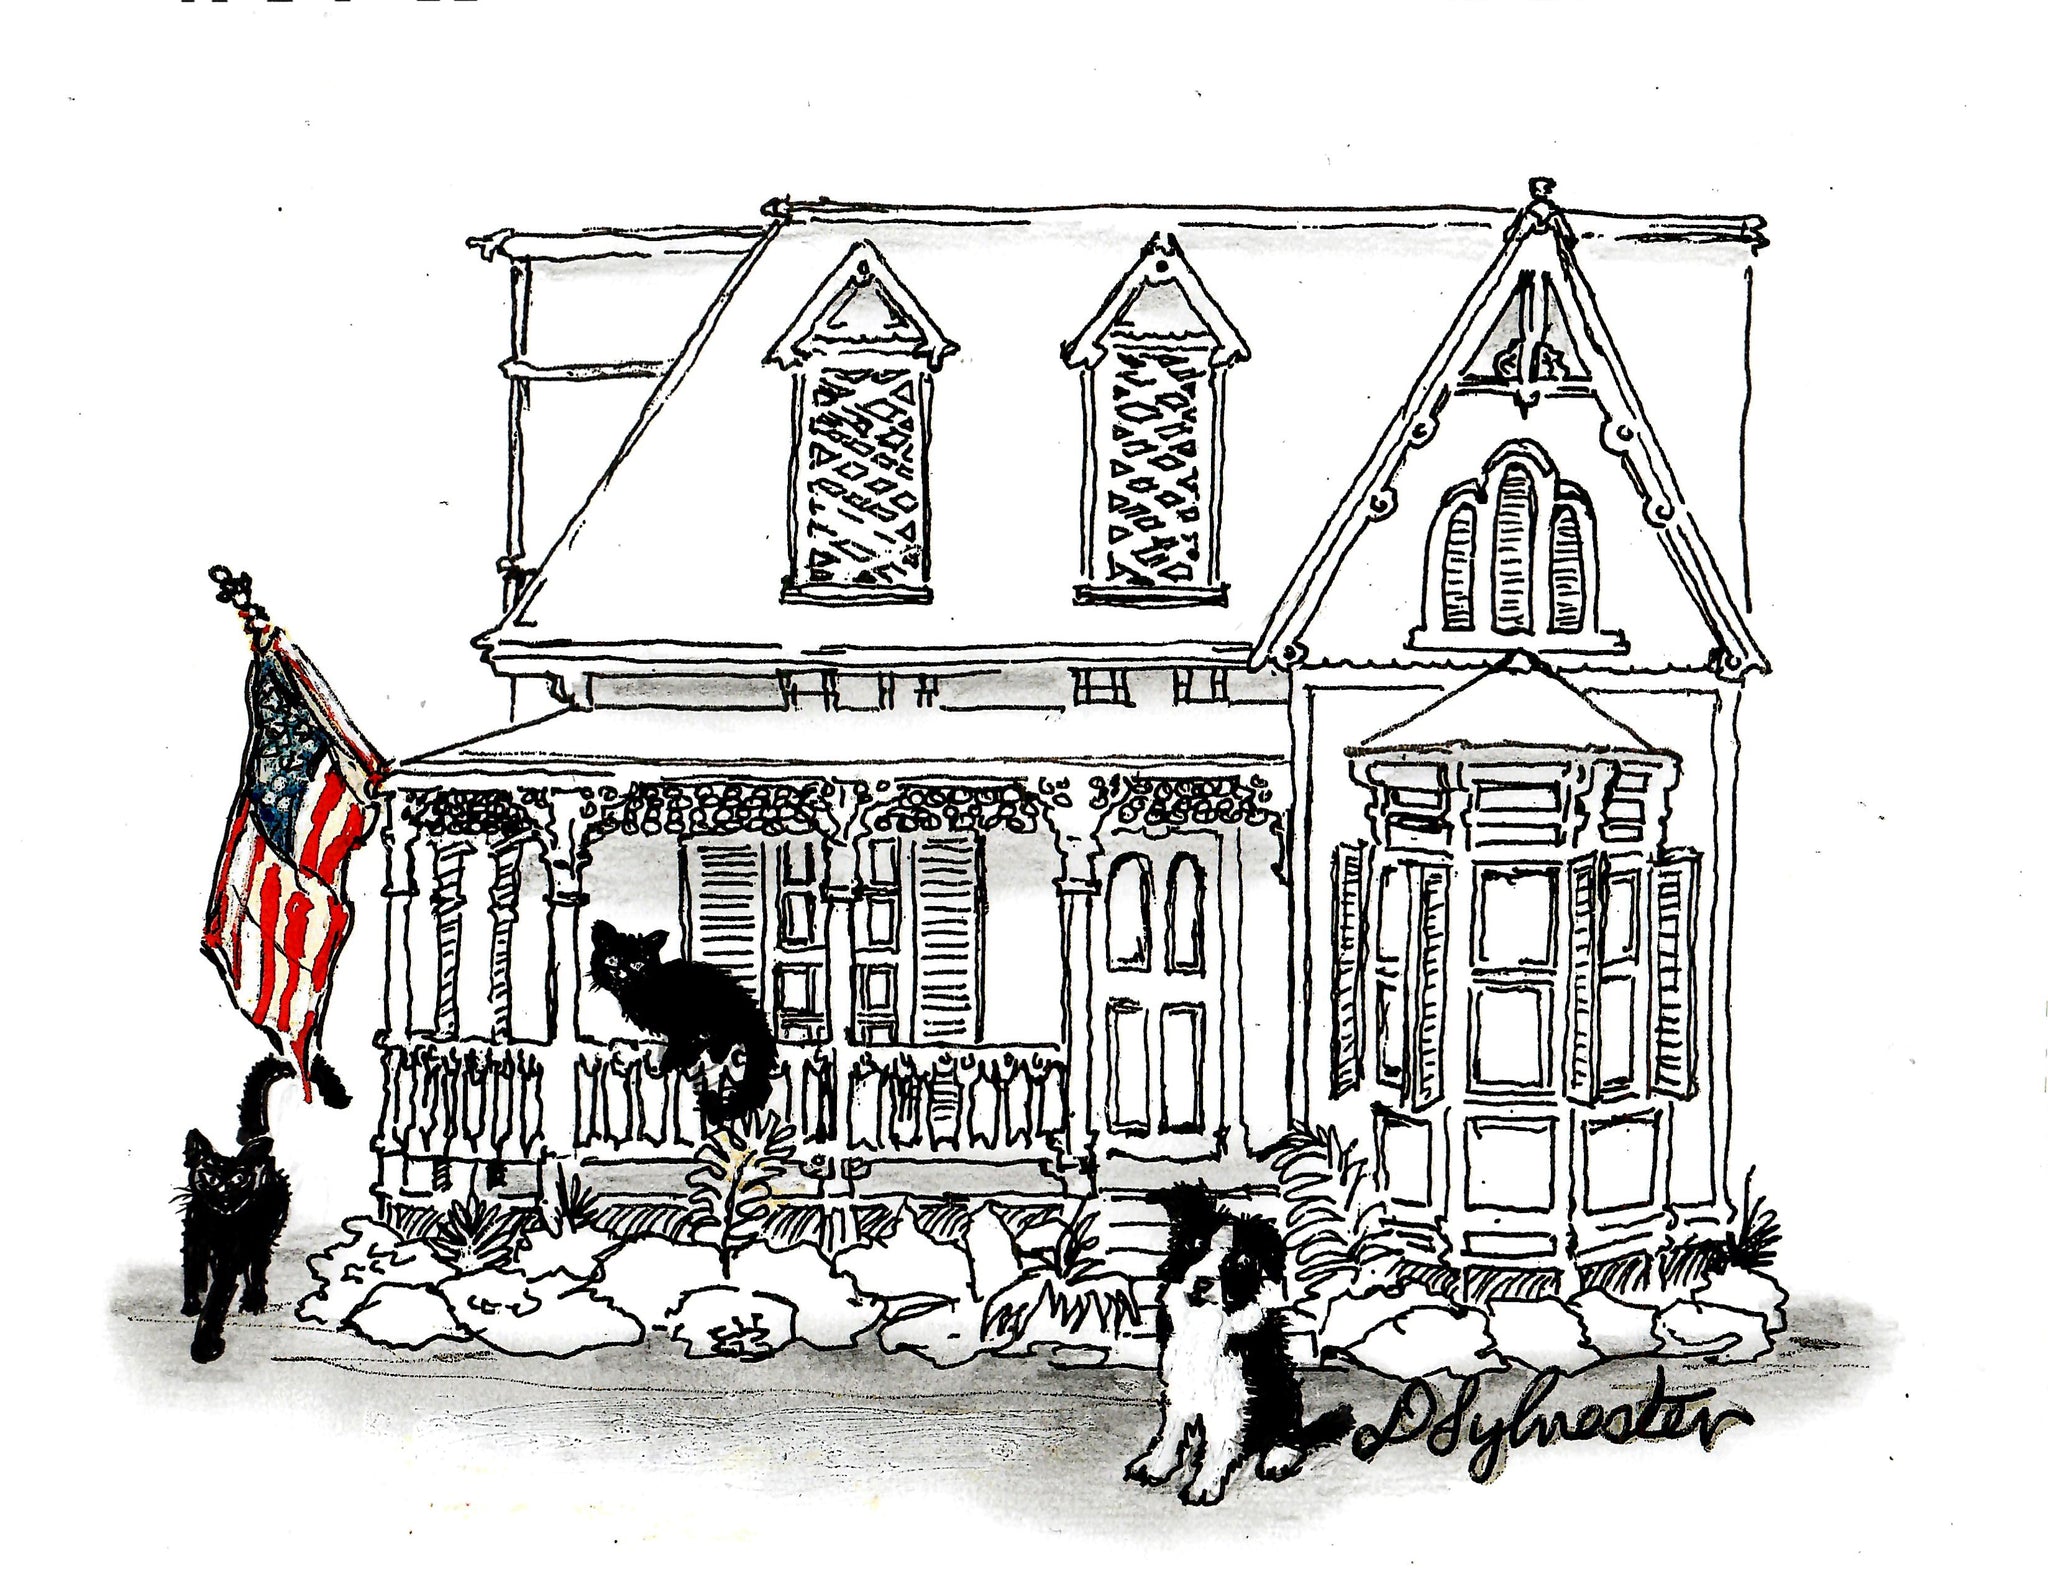 Cats A Dog Around Their Home In New Orleans Mid-City With The American Flag